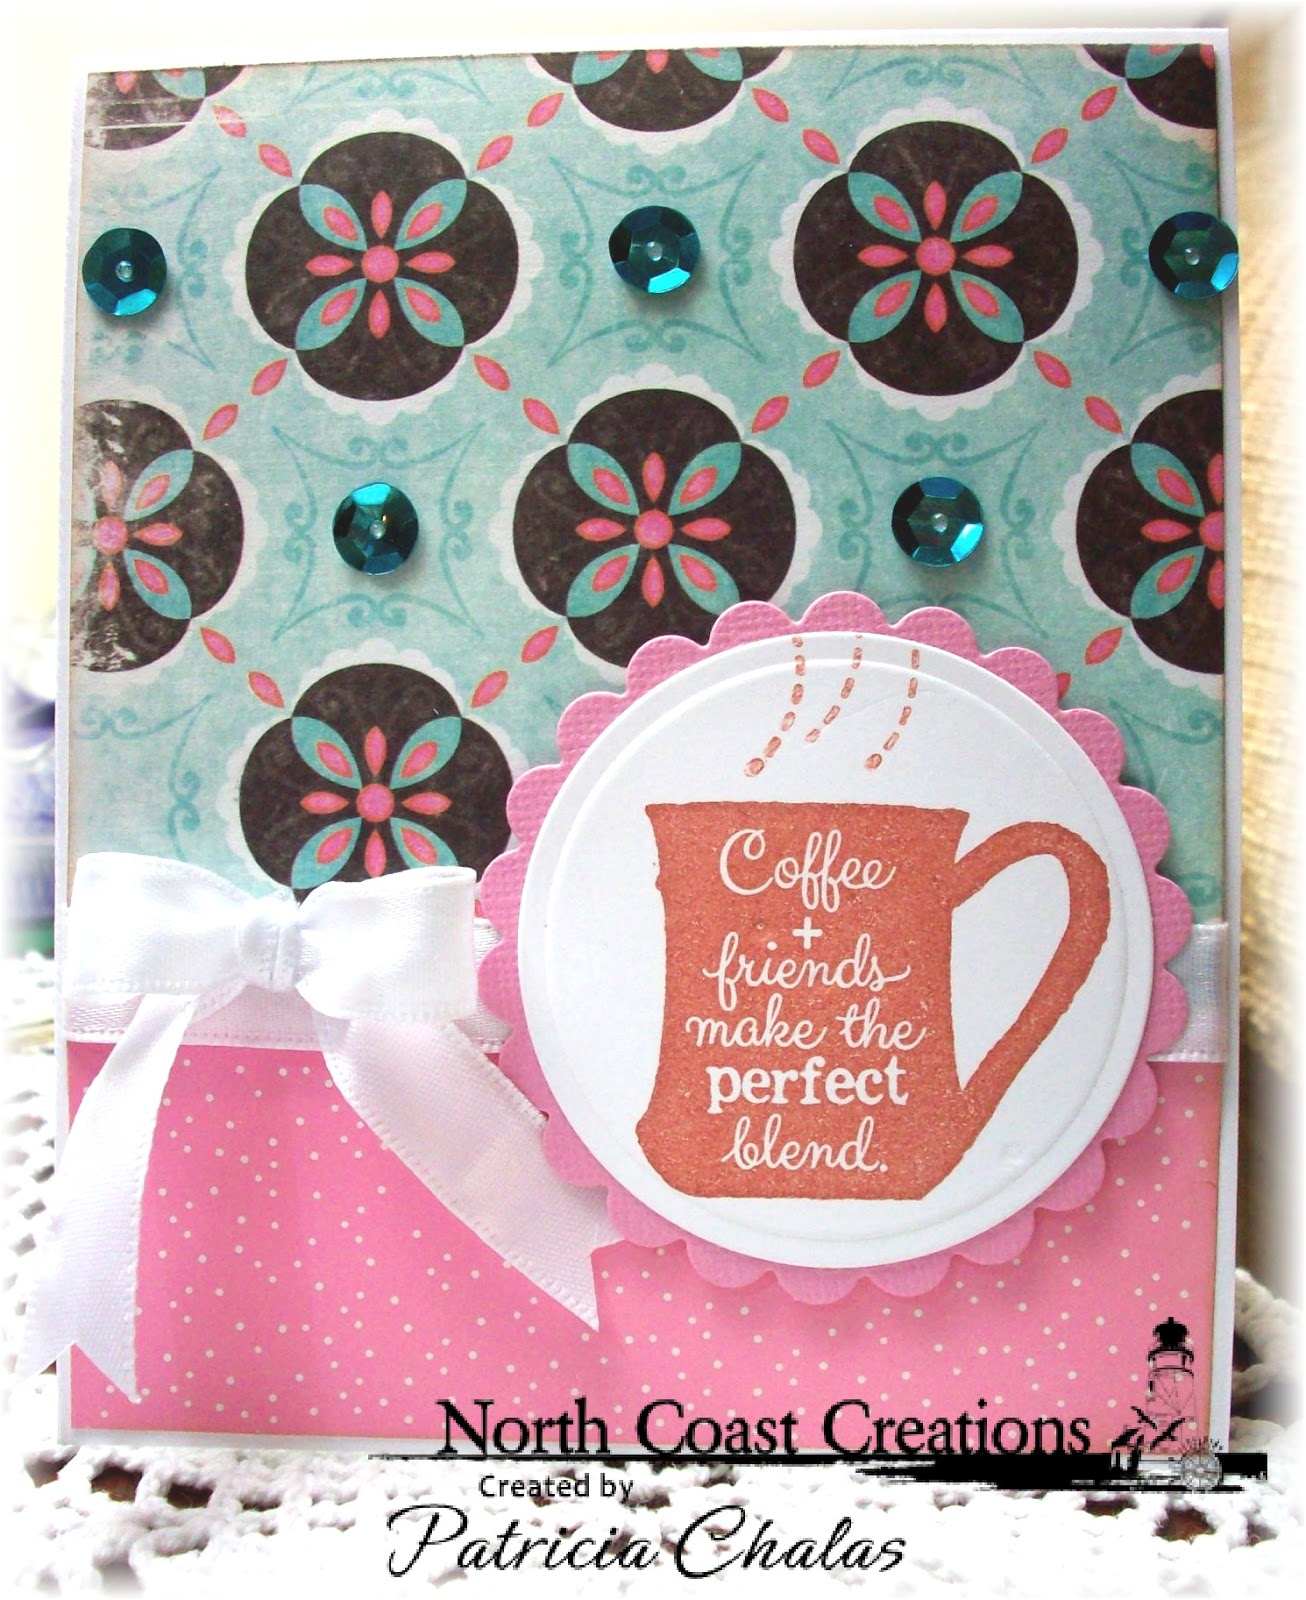 Stamps - North Coast Creations What's Brewin'?